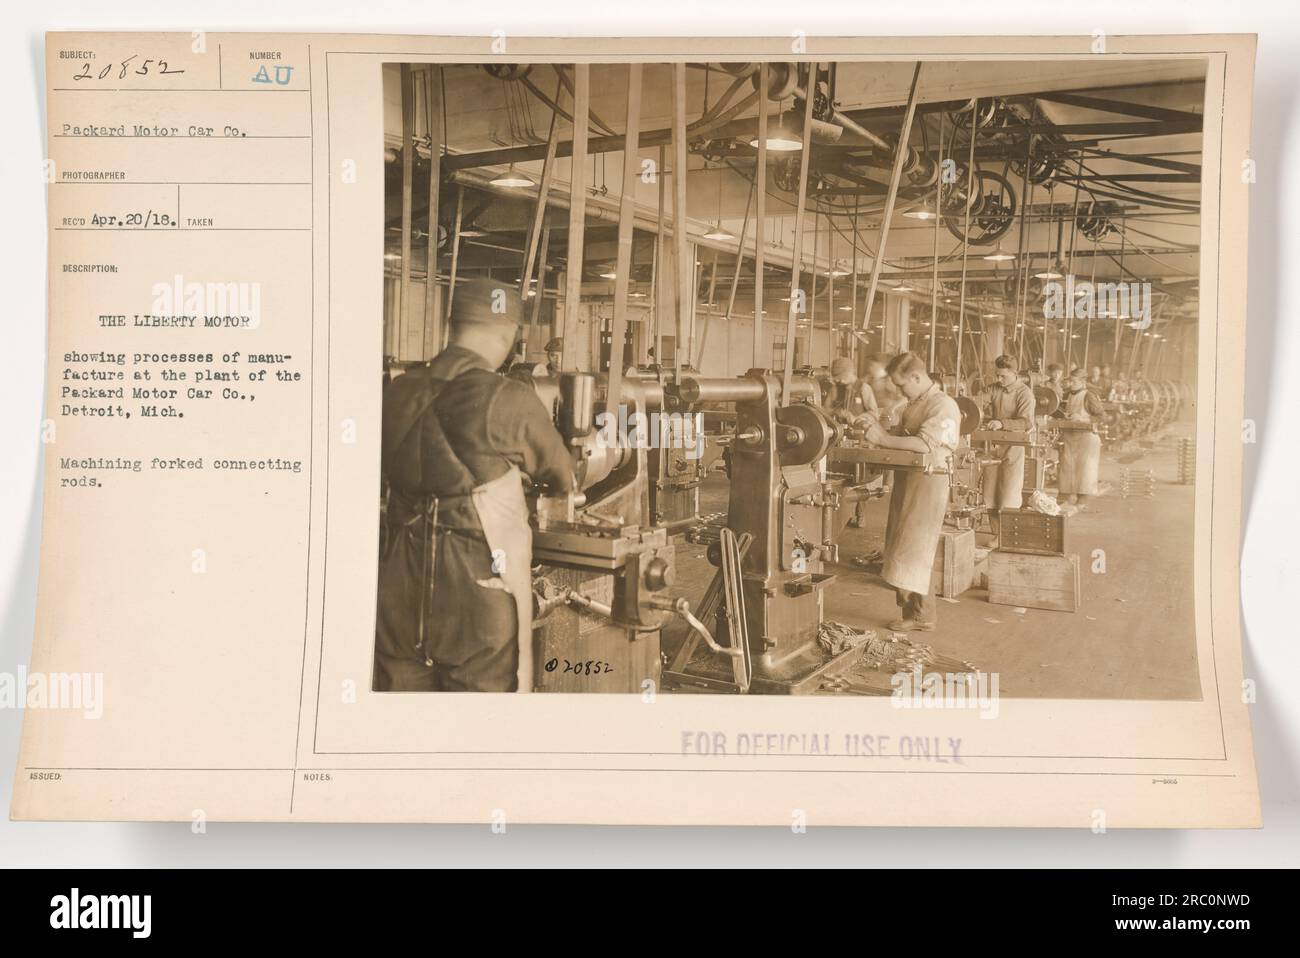 This photograph, labeled as 111-SC-20852, was taken on April 20, 1918, and is part of a series documenting American military activities during World War One. The image shows the manufacturing process at the Packard Motor Car Co. in Detroit, Michigan, specifically highlighting the machining of forked connecting rods for the Liberty Motor. This information is marked as 'For Official Use Only.' Stock Photo